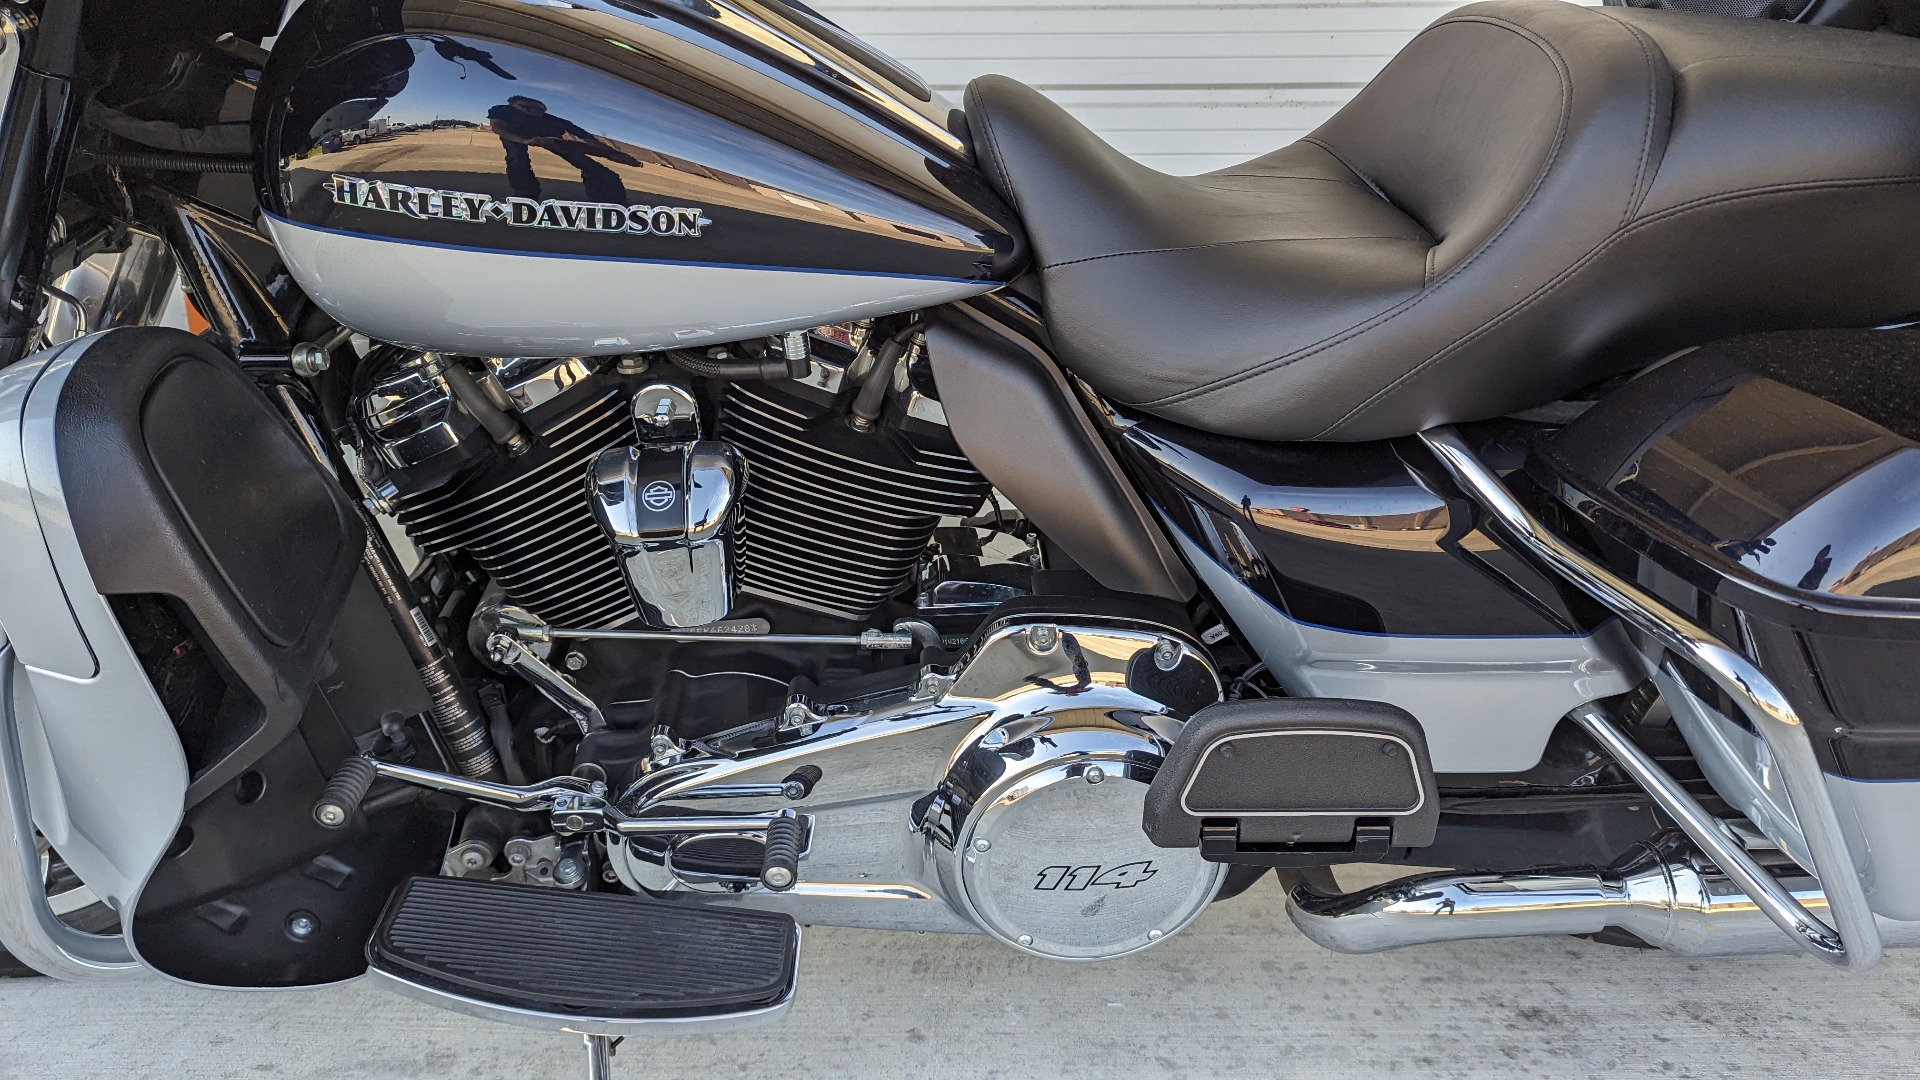 2019 harley davidson electra glide ultra limited for sale in texas - Photo 7